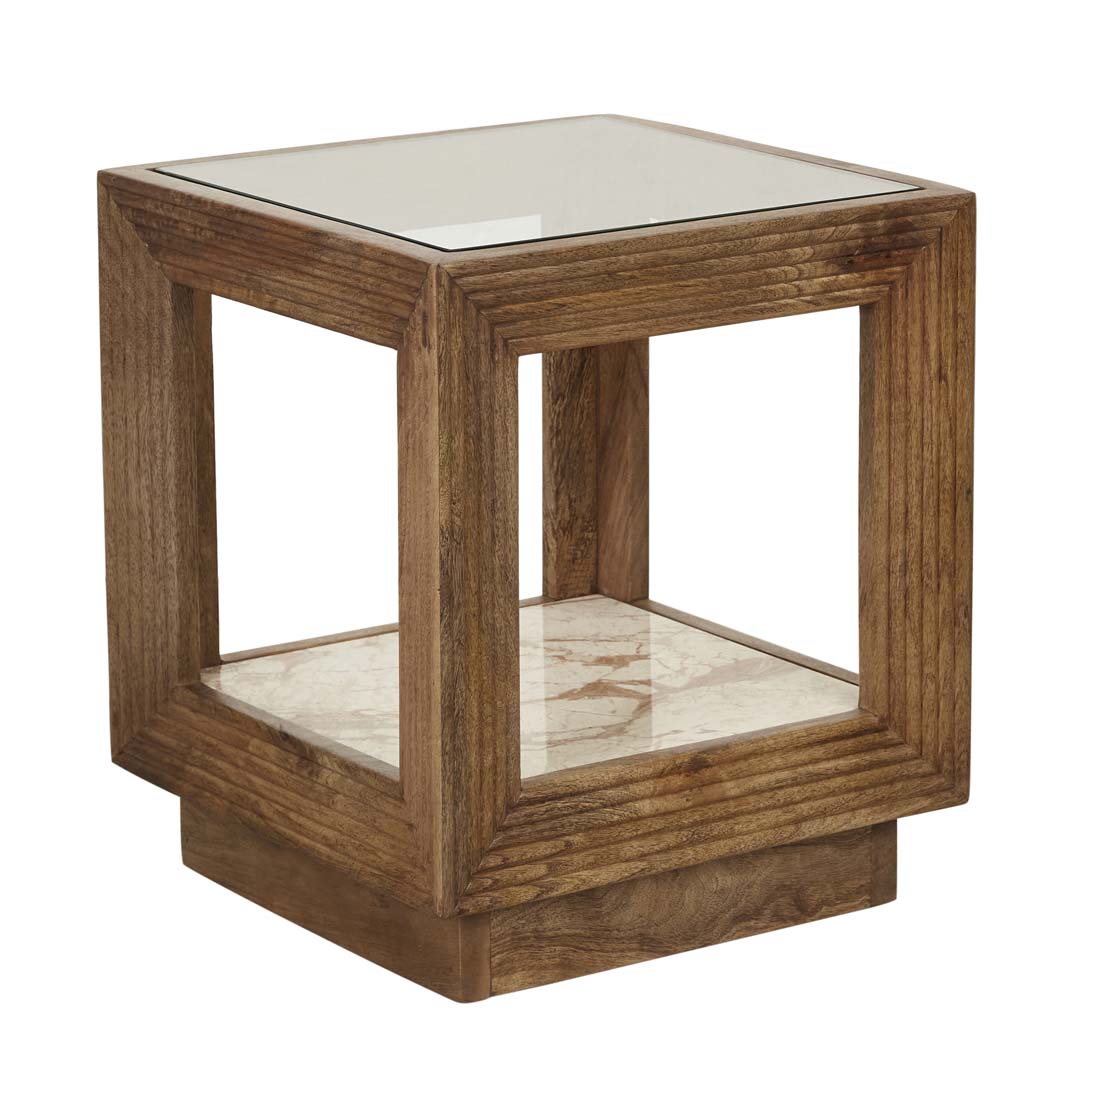 Zephyr Side Table image 17